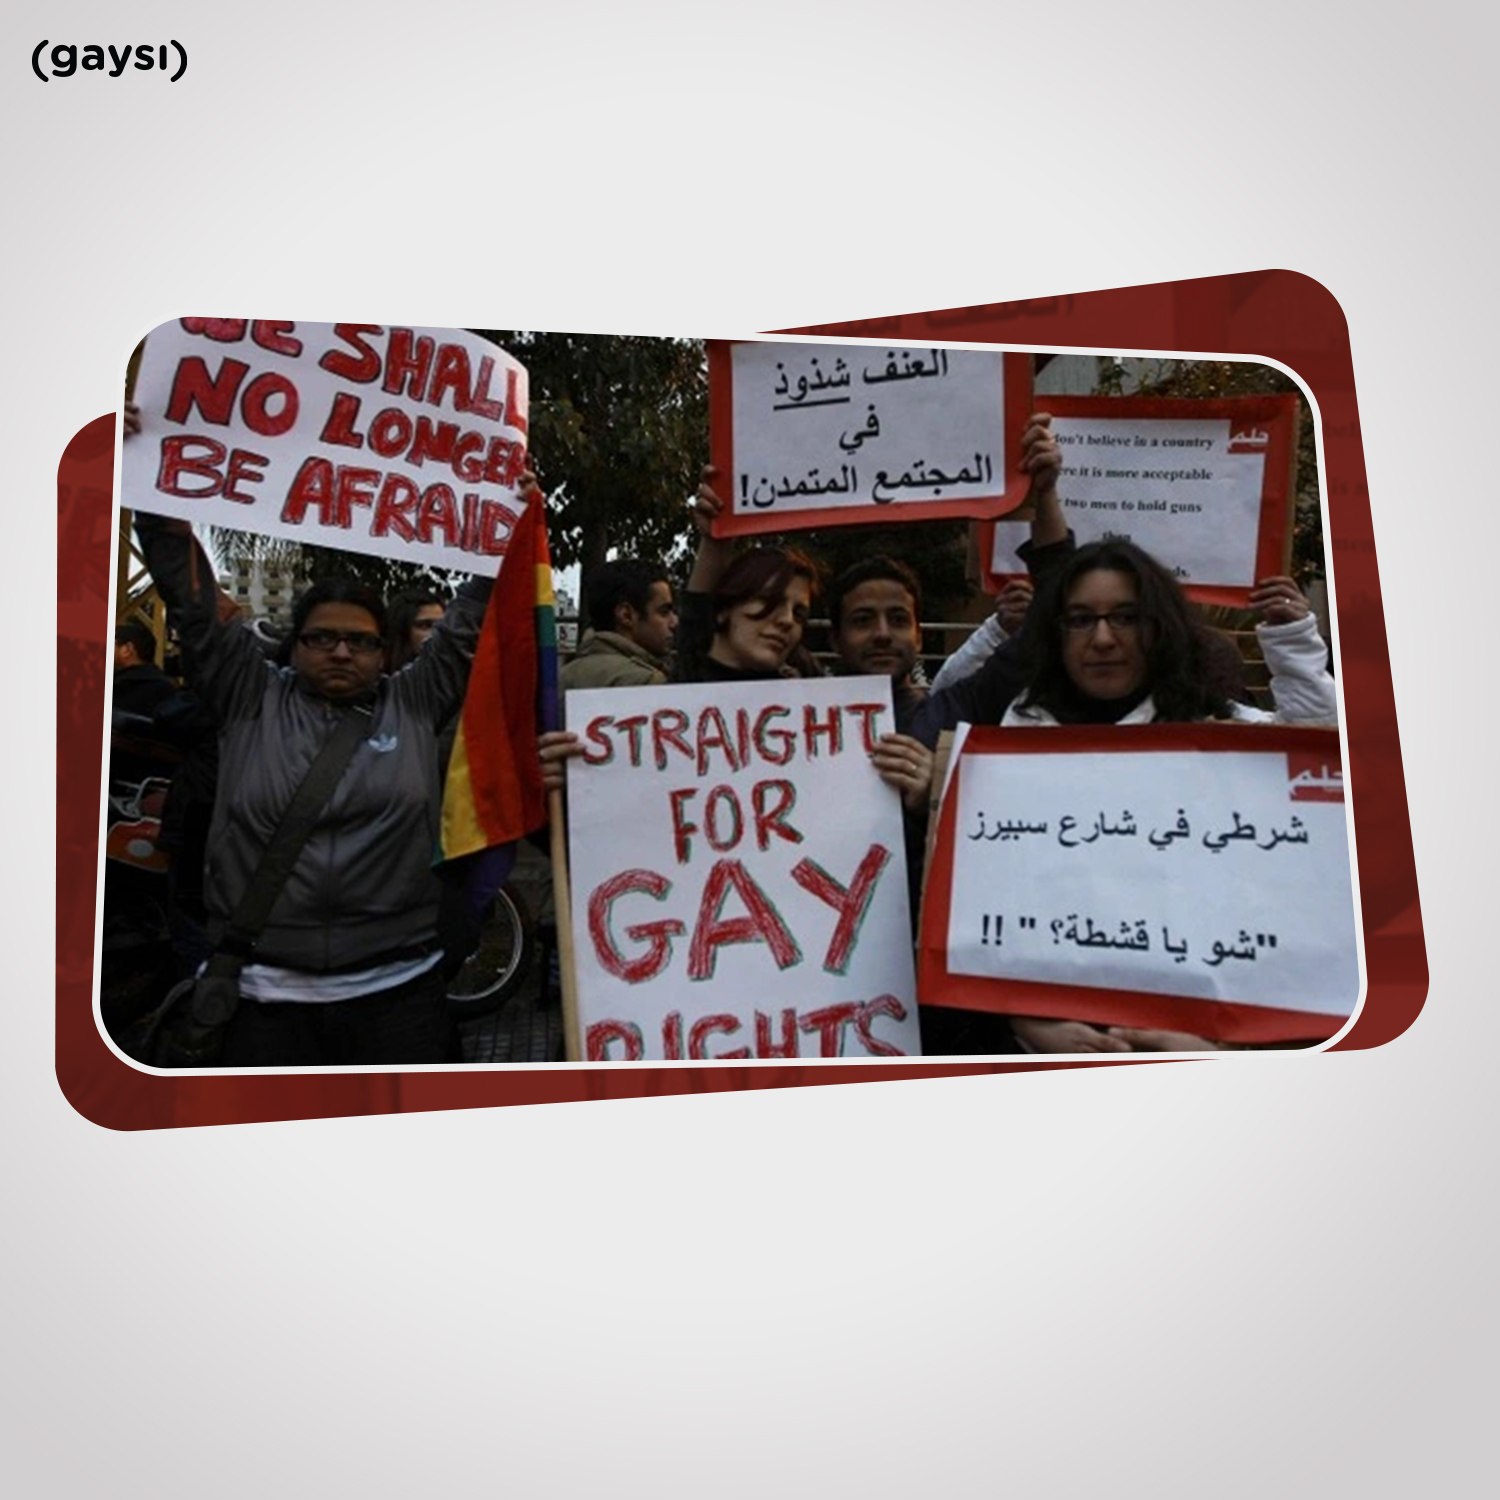 A Widespread And Coordinated Anti-LGBTQIA+ Campaign Is Currently Underway In Much Of The Arab World And Islamic World